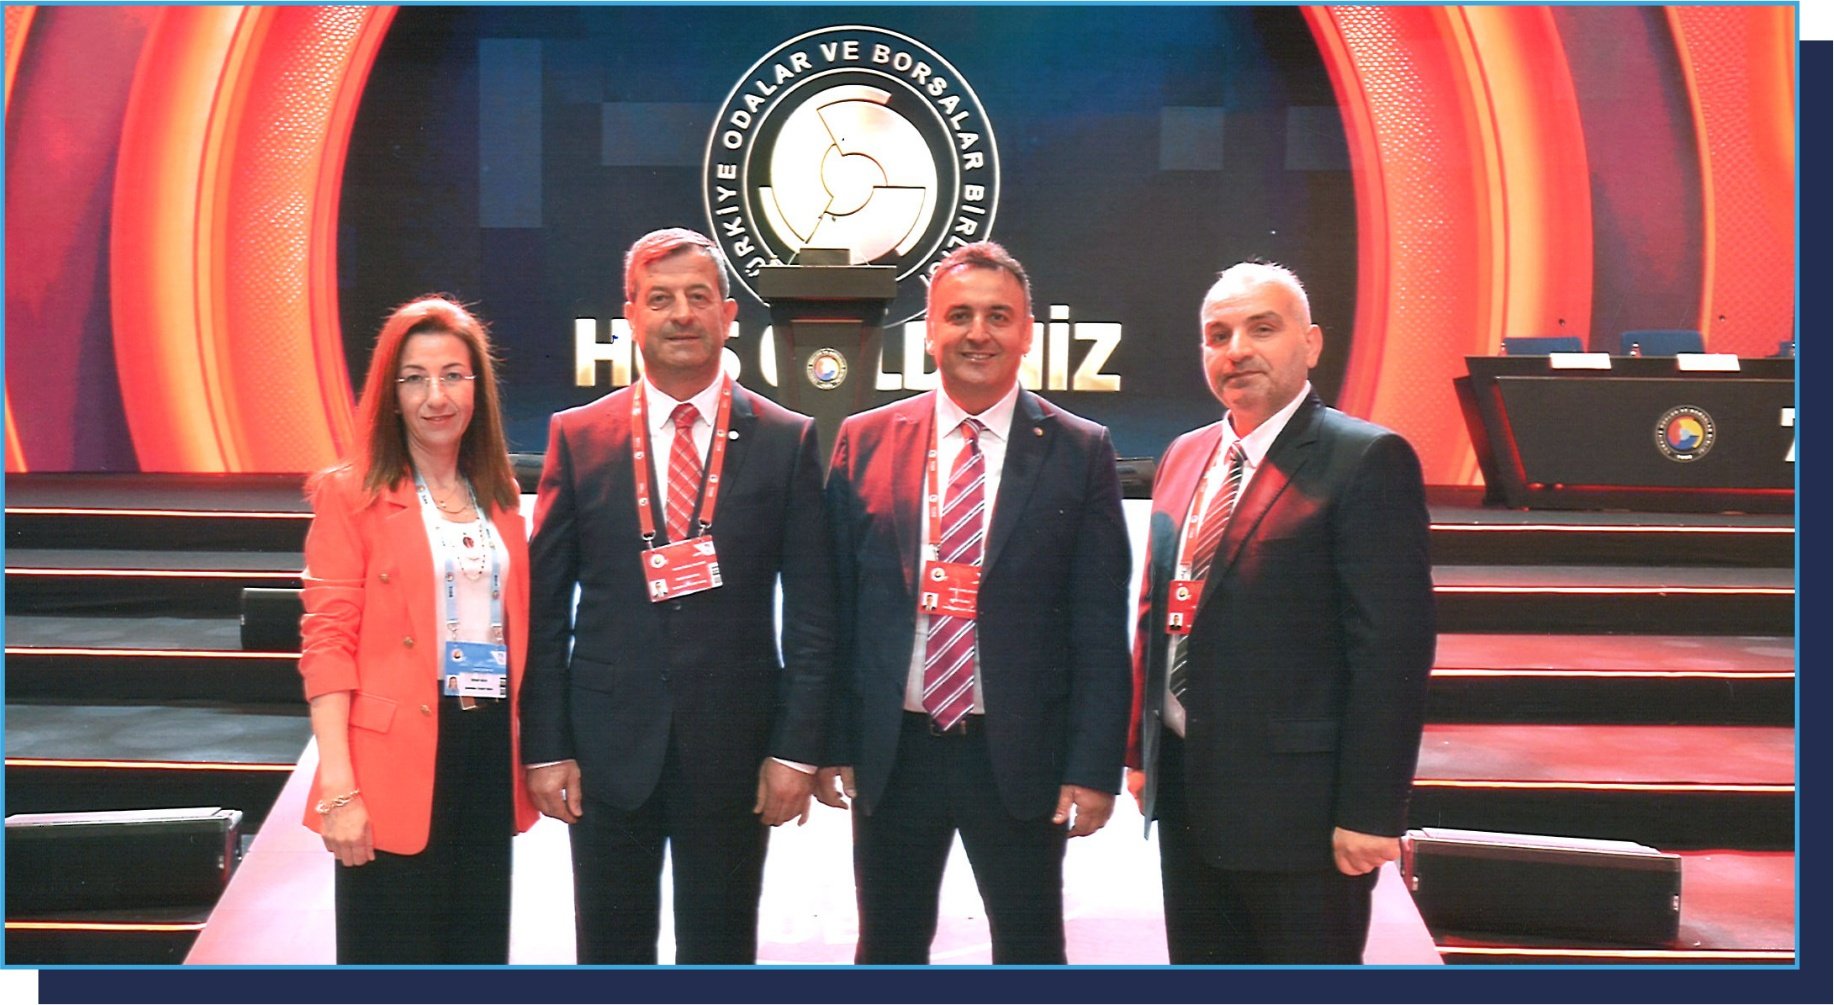 THE 79TH GENERAL ASSEMBLY OF THE ASSOCIATION OF CHAMBERS AND EXCHANGES OF TÜRKİYE IS HELD